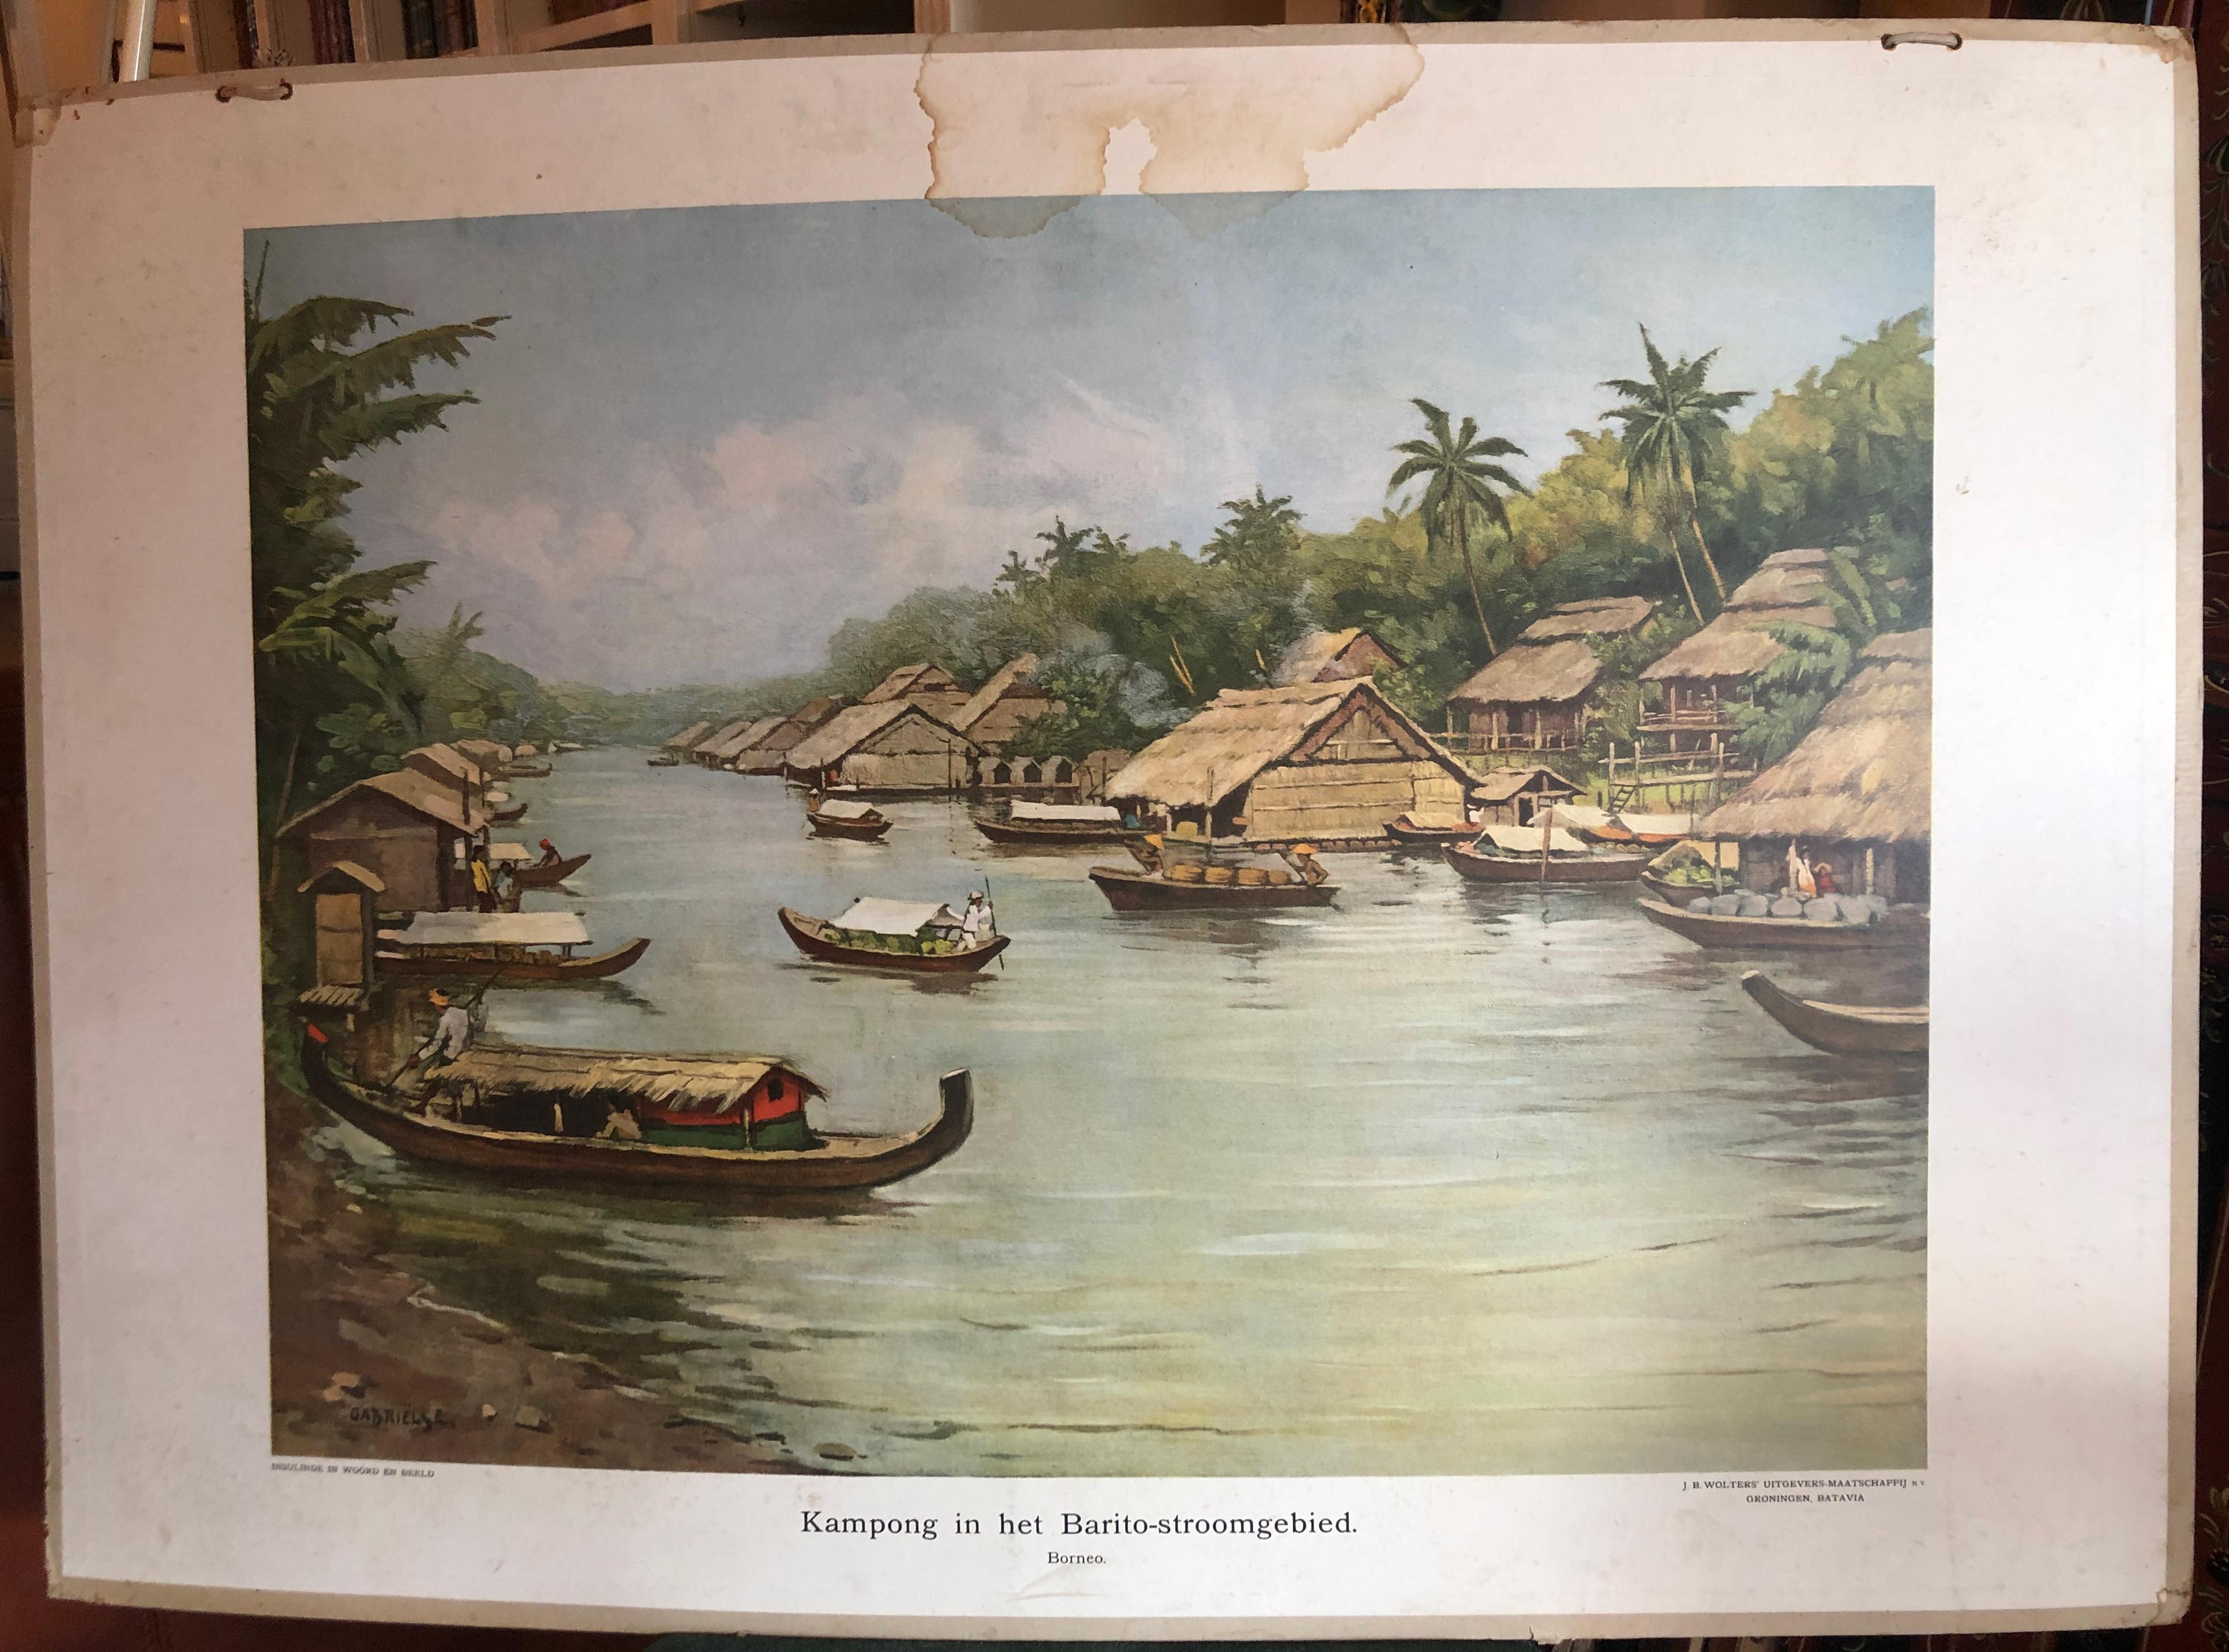 Paper Collection of 8 Vintage School Charts of Indonesia, Early 20th Century